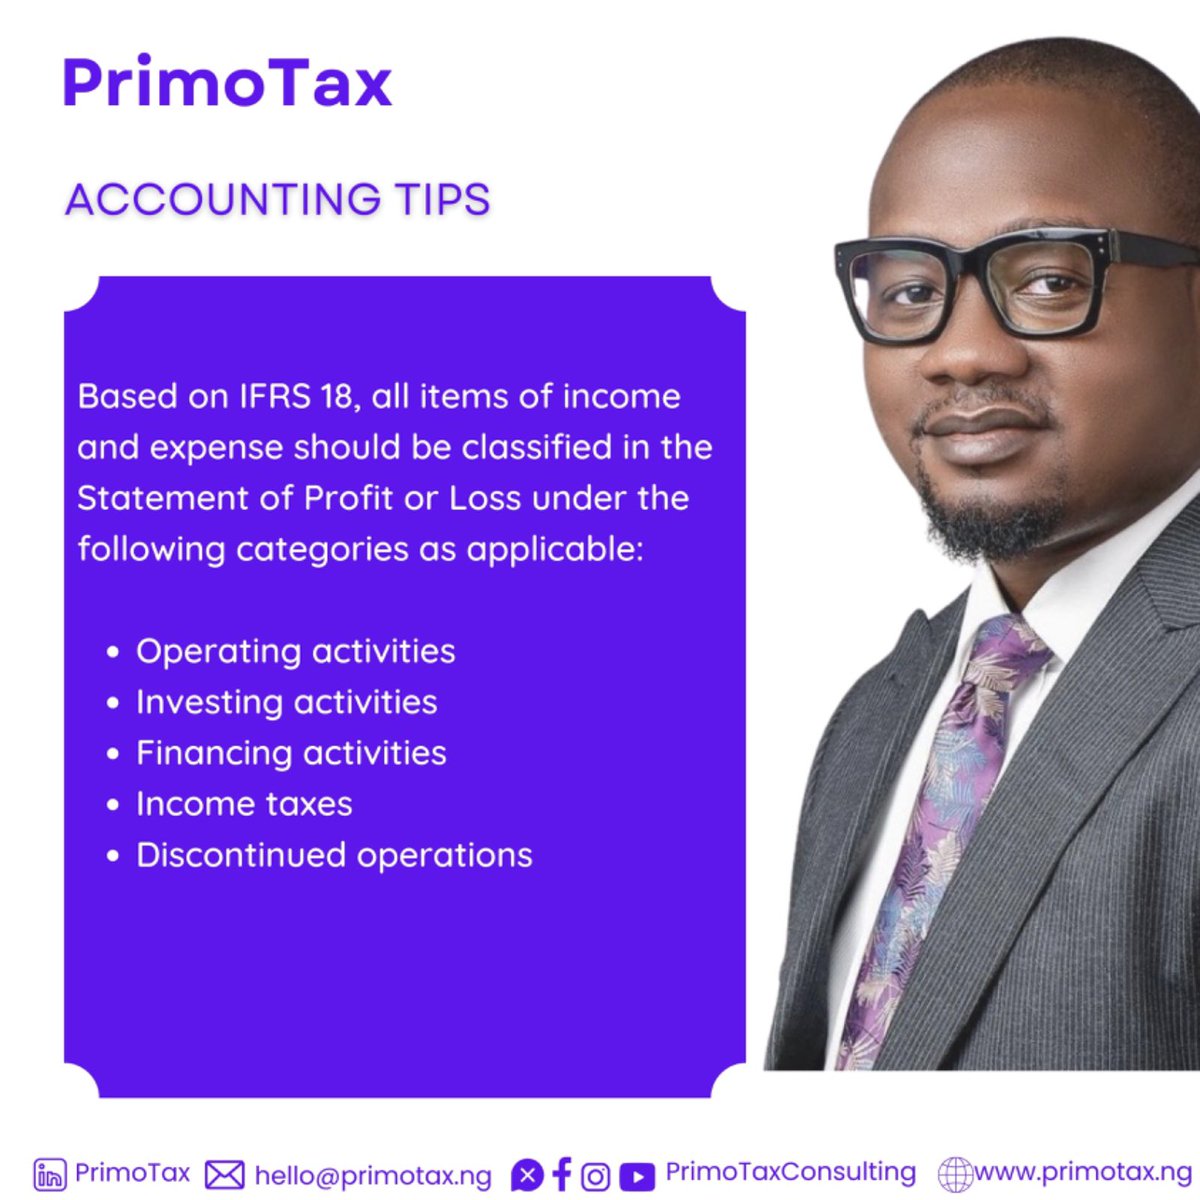 #AccountingTips

Based on IFRS 18, items of income & expense should be classified in the Statement of Profit or Loss under the following categories as applicable:

✅ Operating activities
✅ Investing activities
✅ Financing activities
✅ Income taxes
✅ Discontinued operations